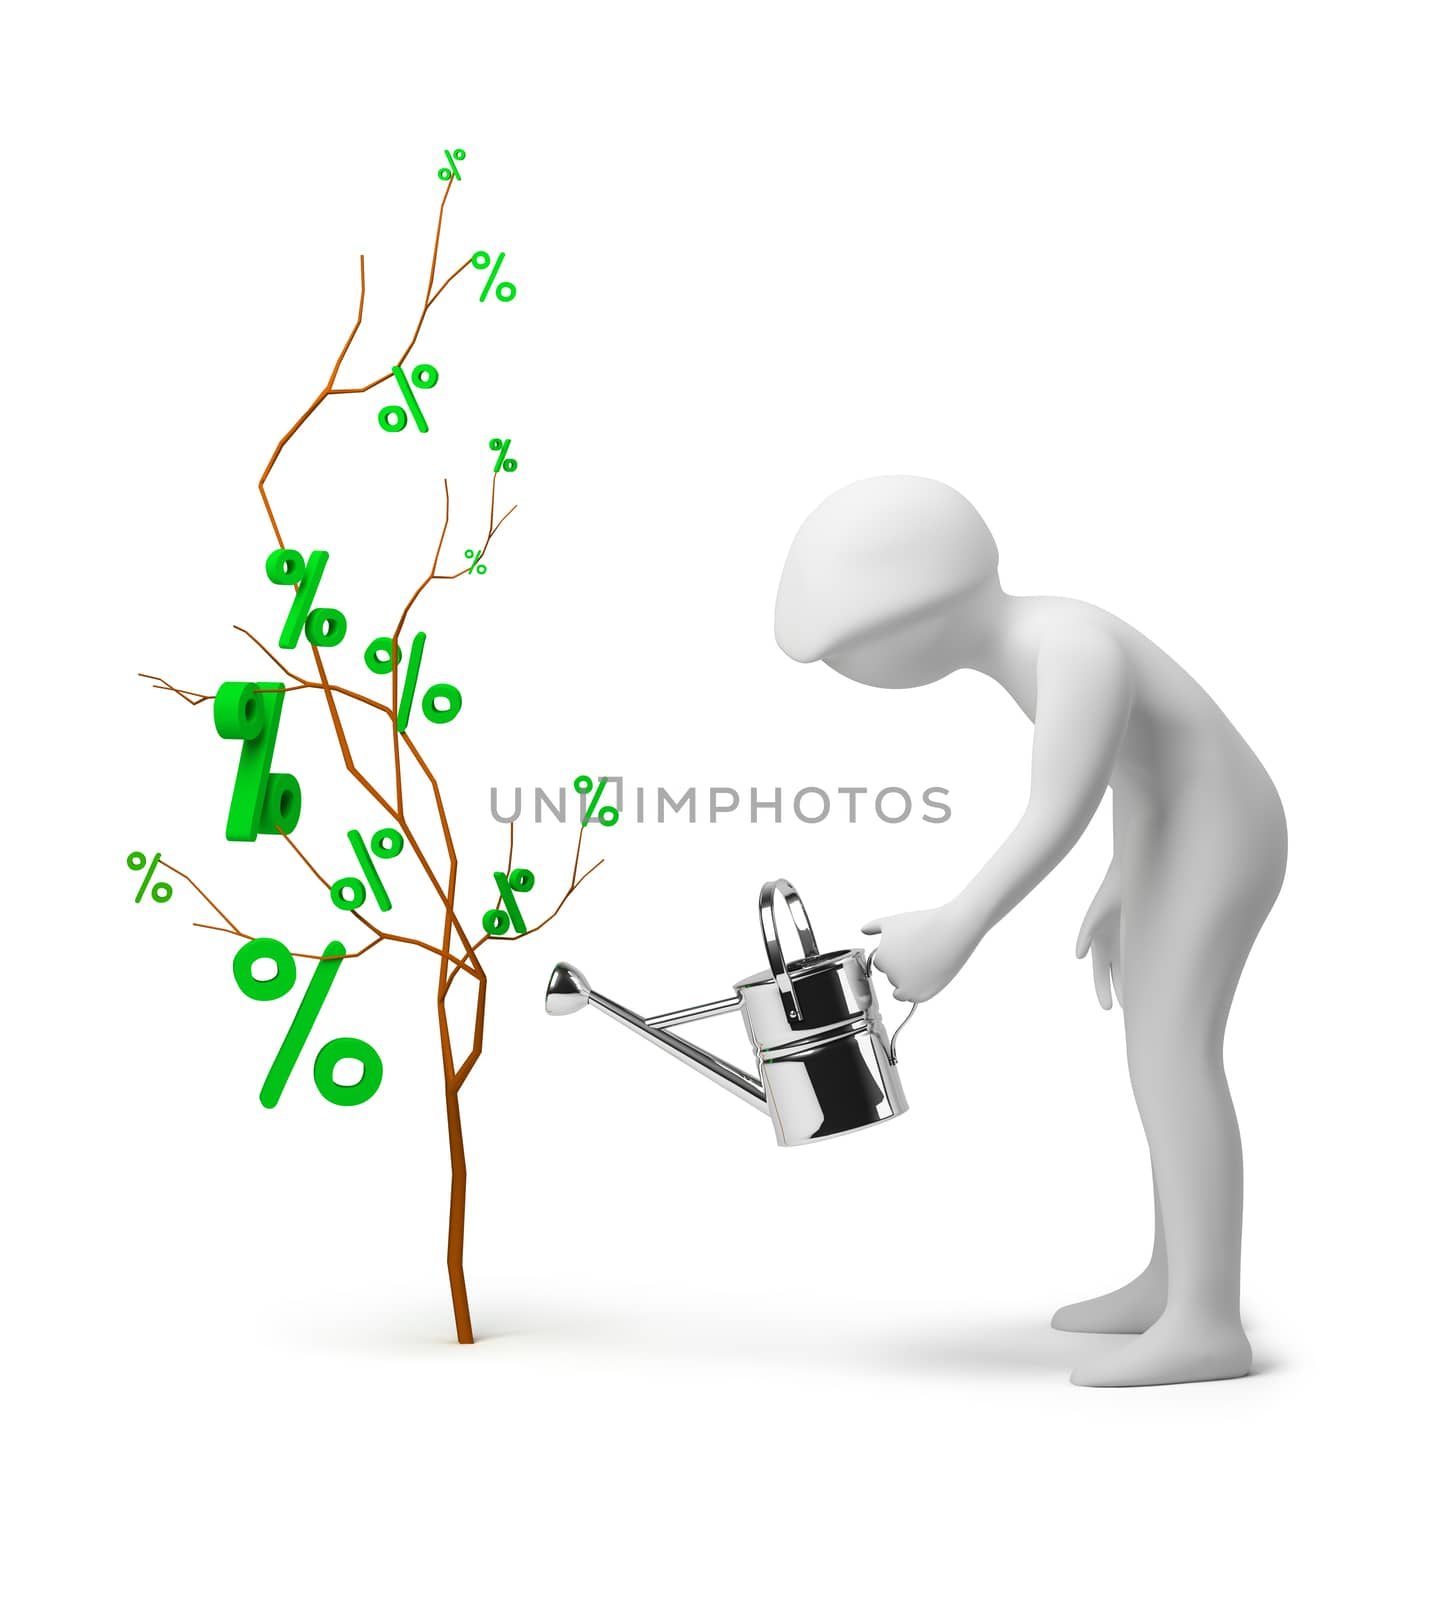 3d people waters a tree of percent. 3d image. Isolated white background.